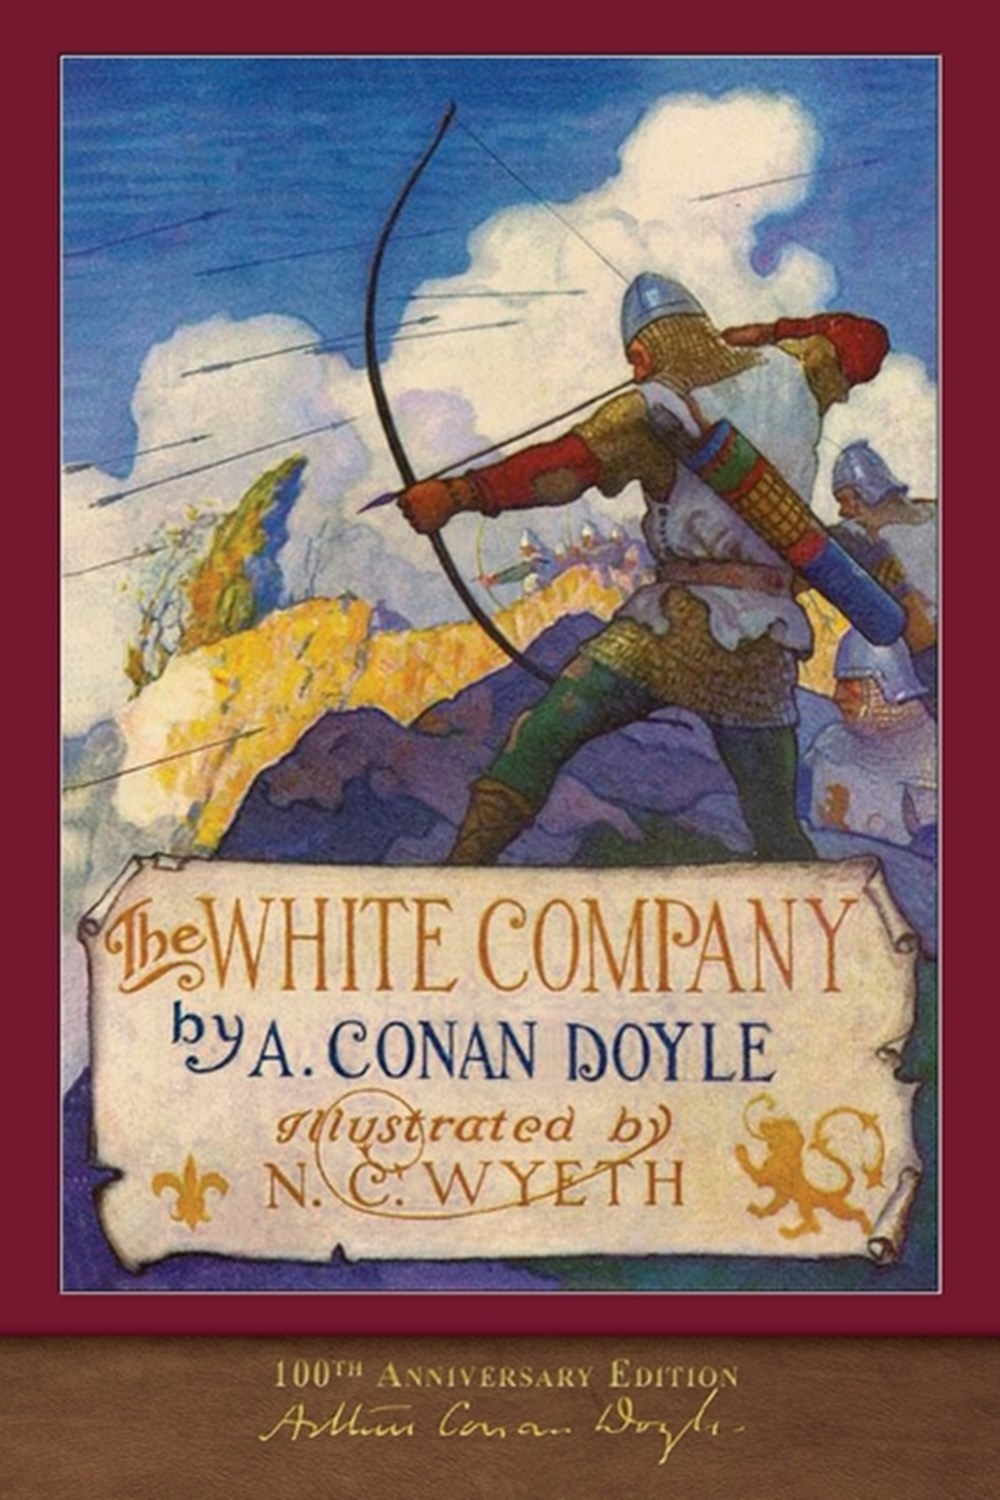 White Company (100th Anniversary Edition) Illustrated by N. C. Wyeth